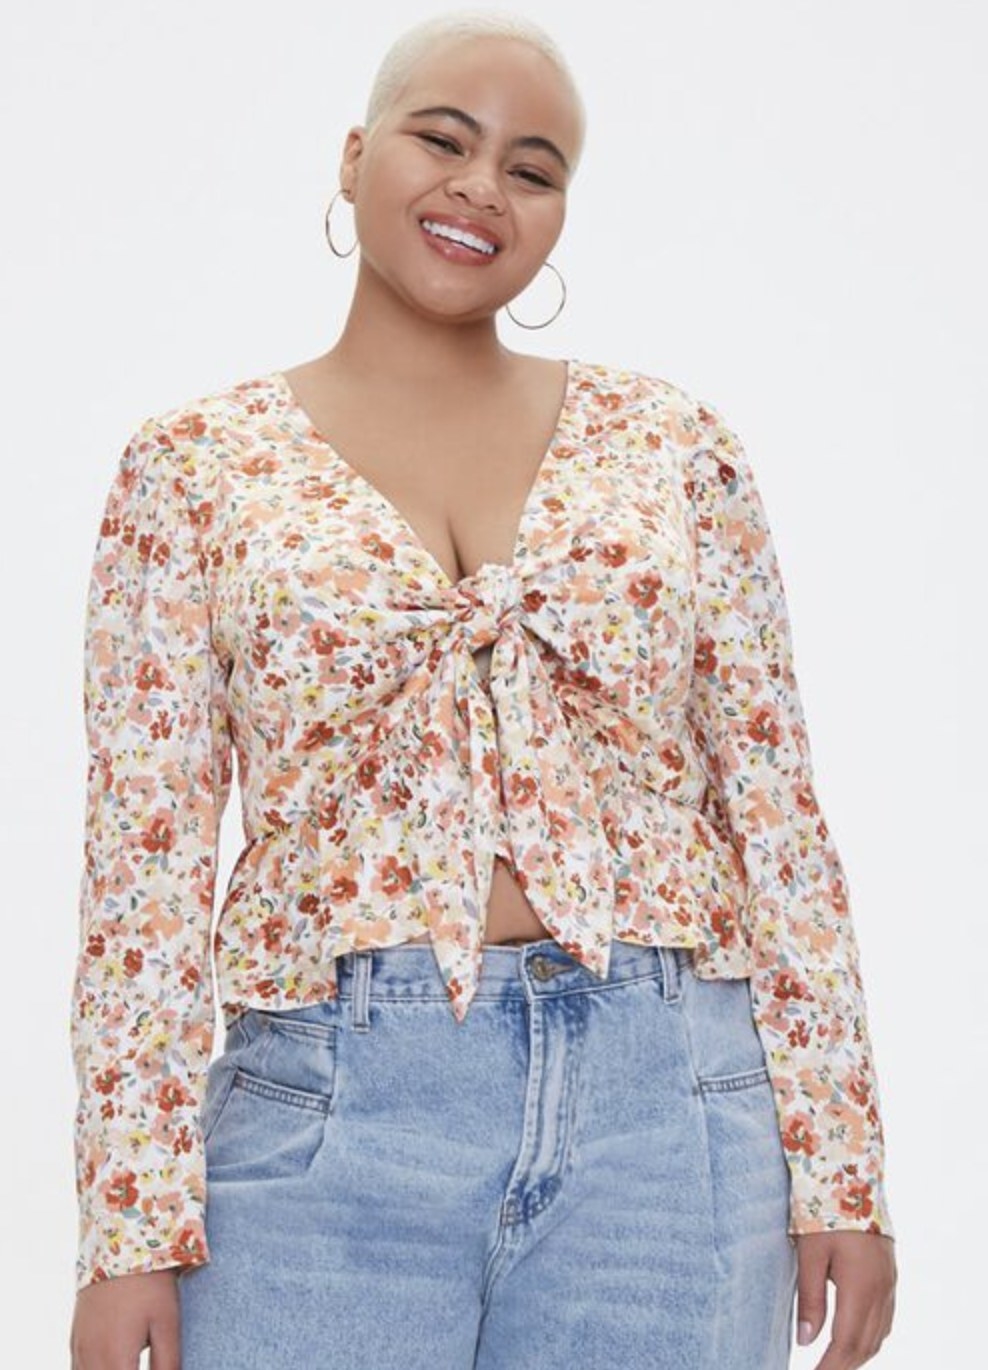 Model is wearing a white and peach floral top and blue jeans